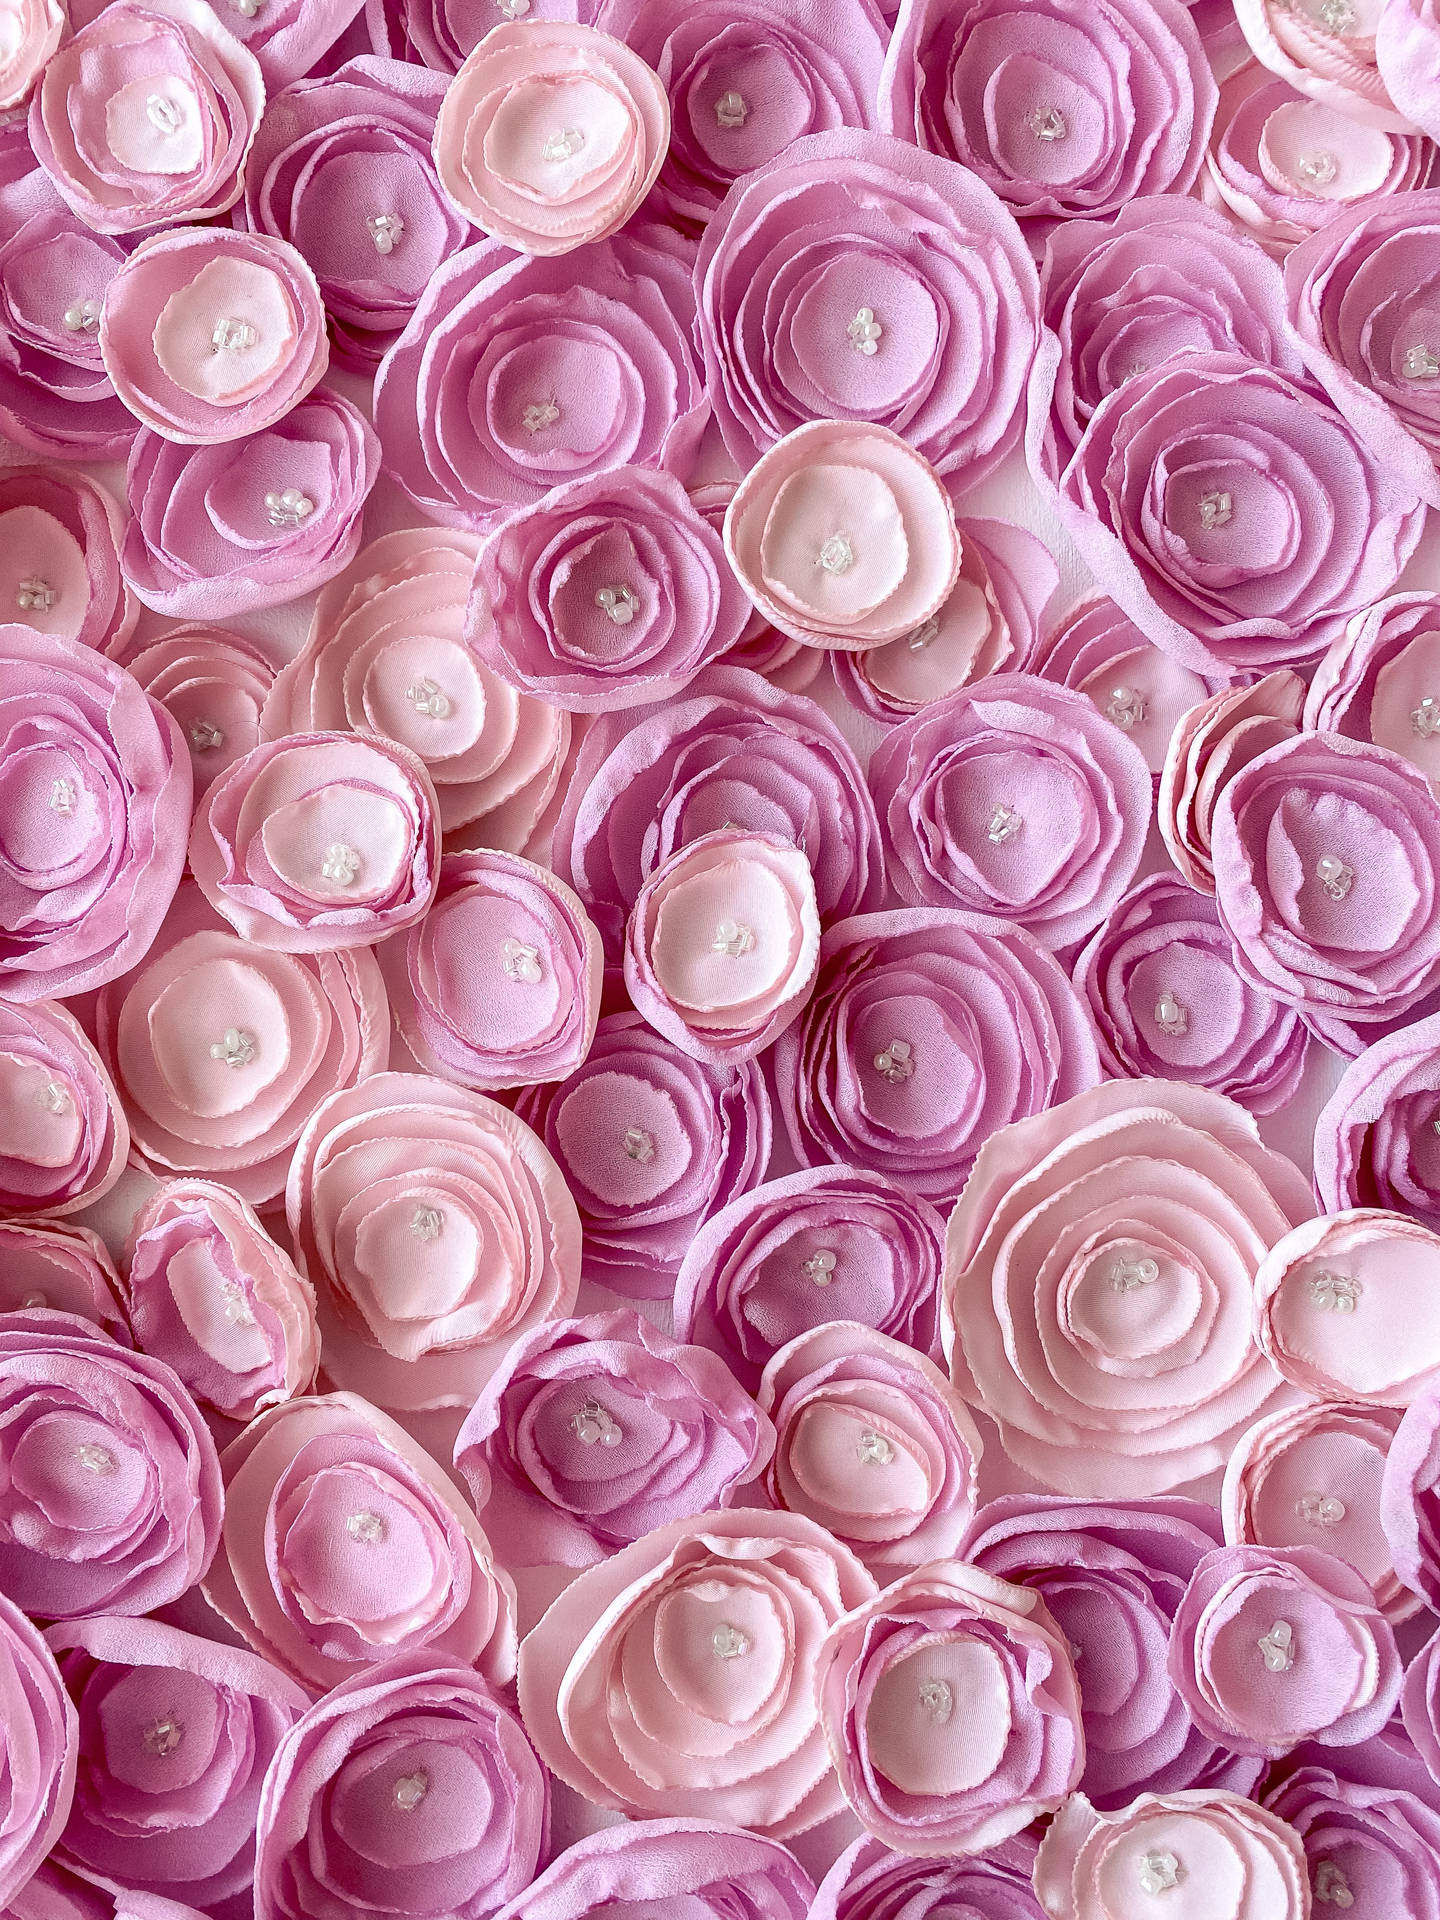 Elegant Floral Lock Screen For Iphone Background